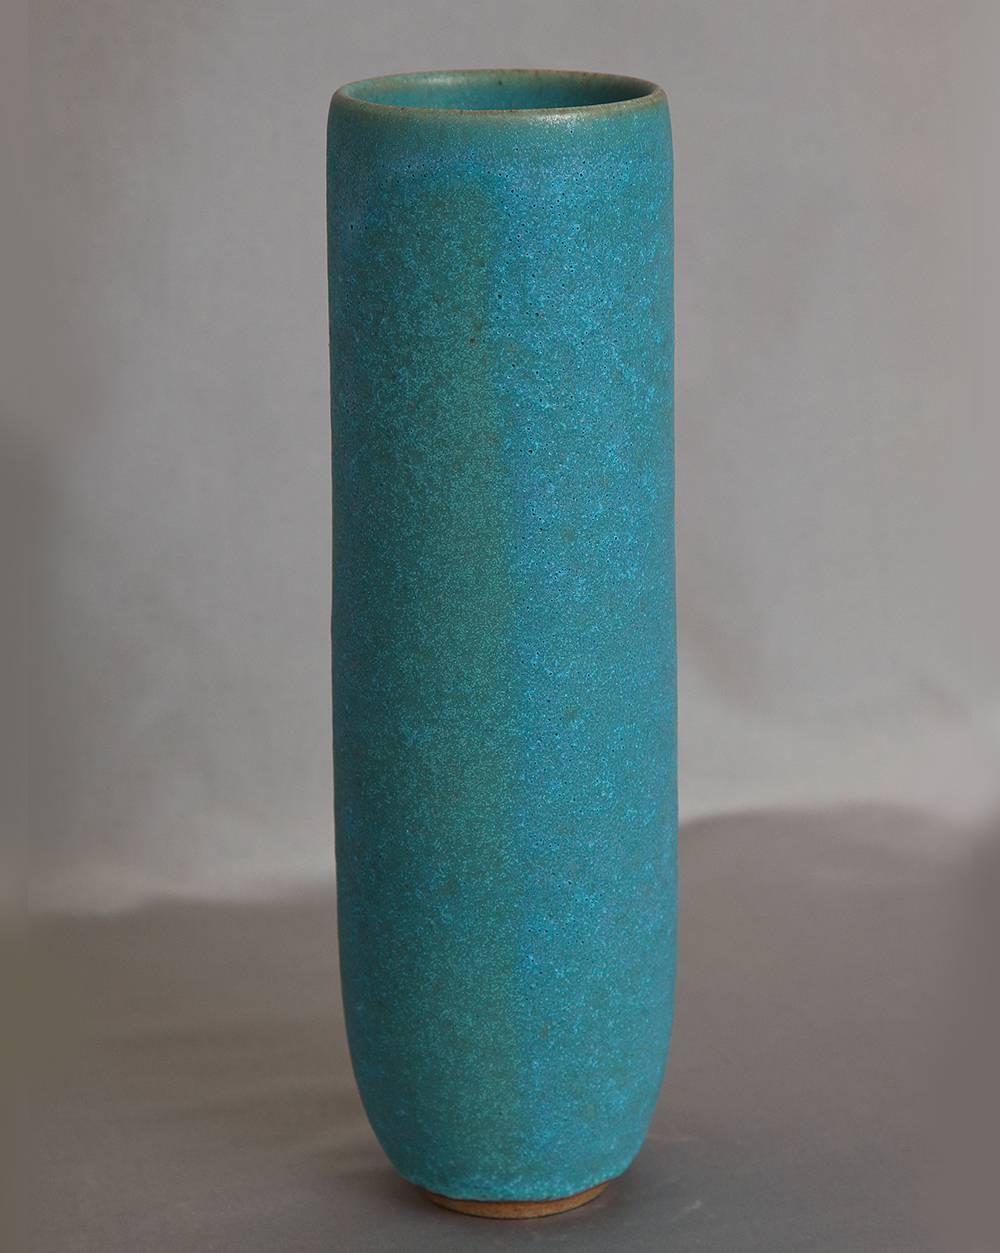 Sandra Zeenni
“Turquoise Vase Wa”, 2014. 
Stoneware vase with matte turquoise glaze. 
Signed SaZe. 

Based in Paris, Sandra's work has been included in museum exhibitions, recently 